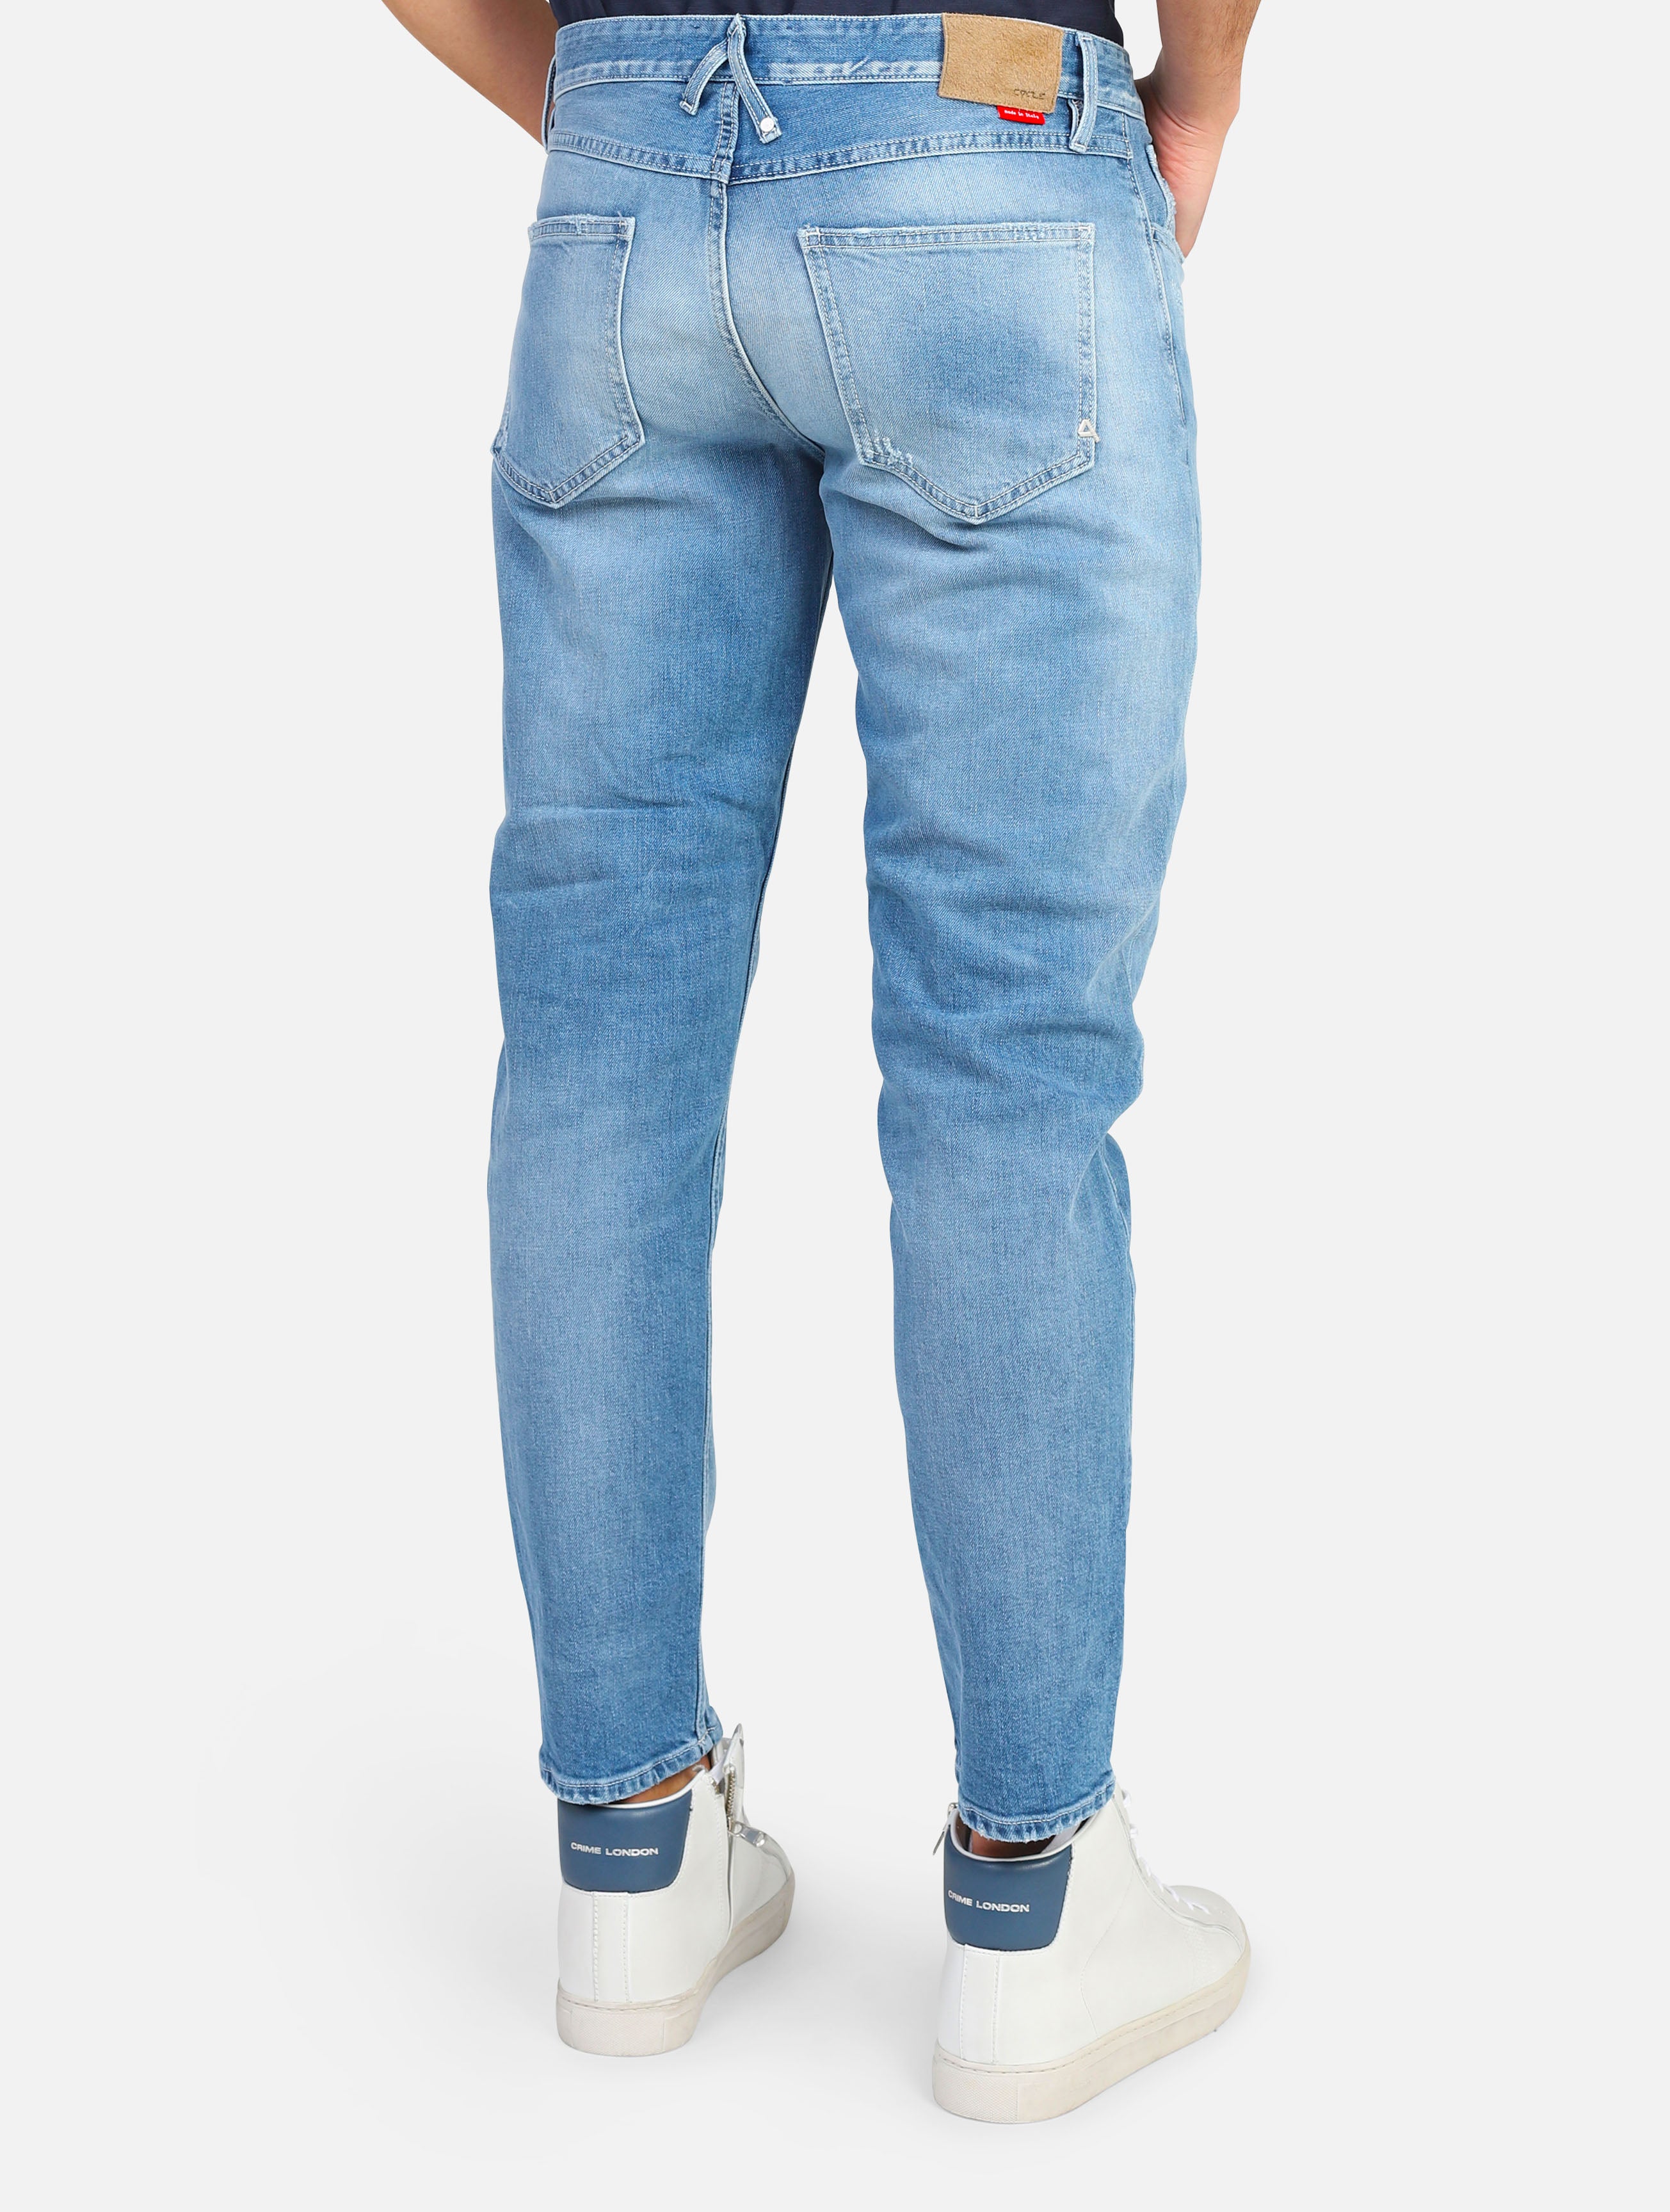 Jeans cycle -  blue uomo  - 3